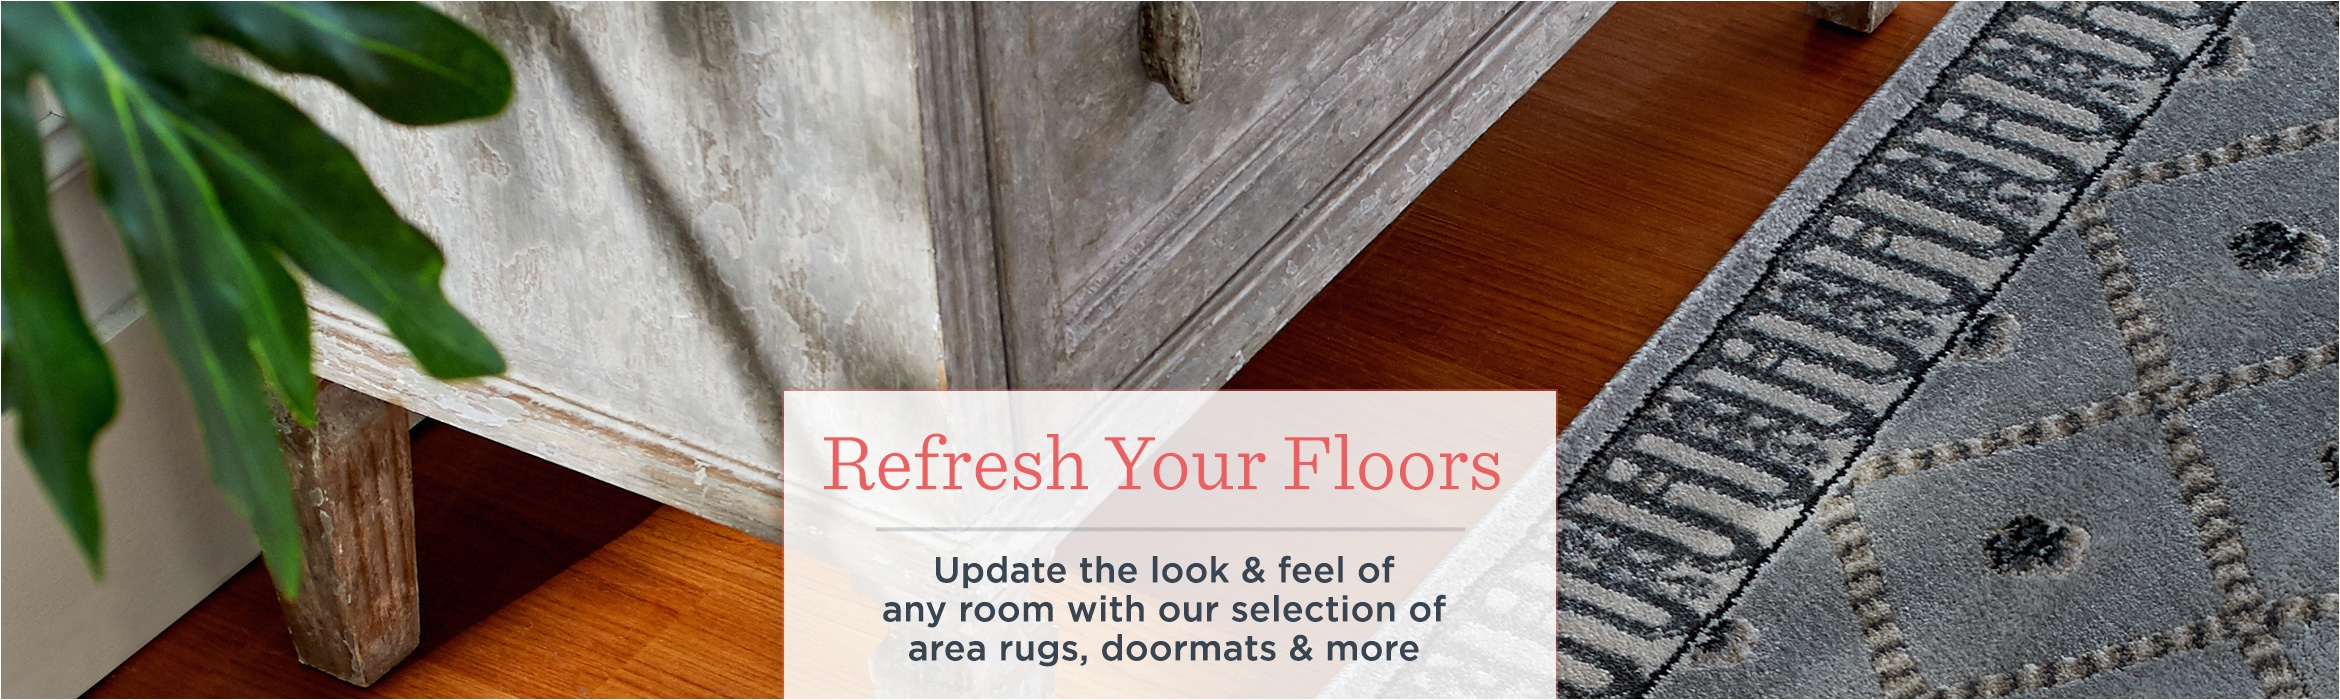 refresh your floors update the look feel of any room with our selection of